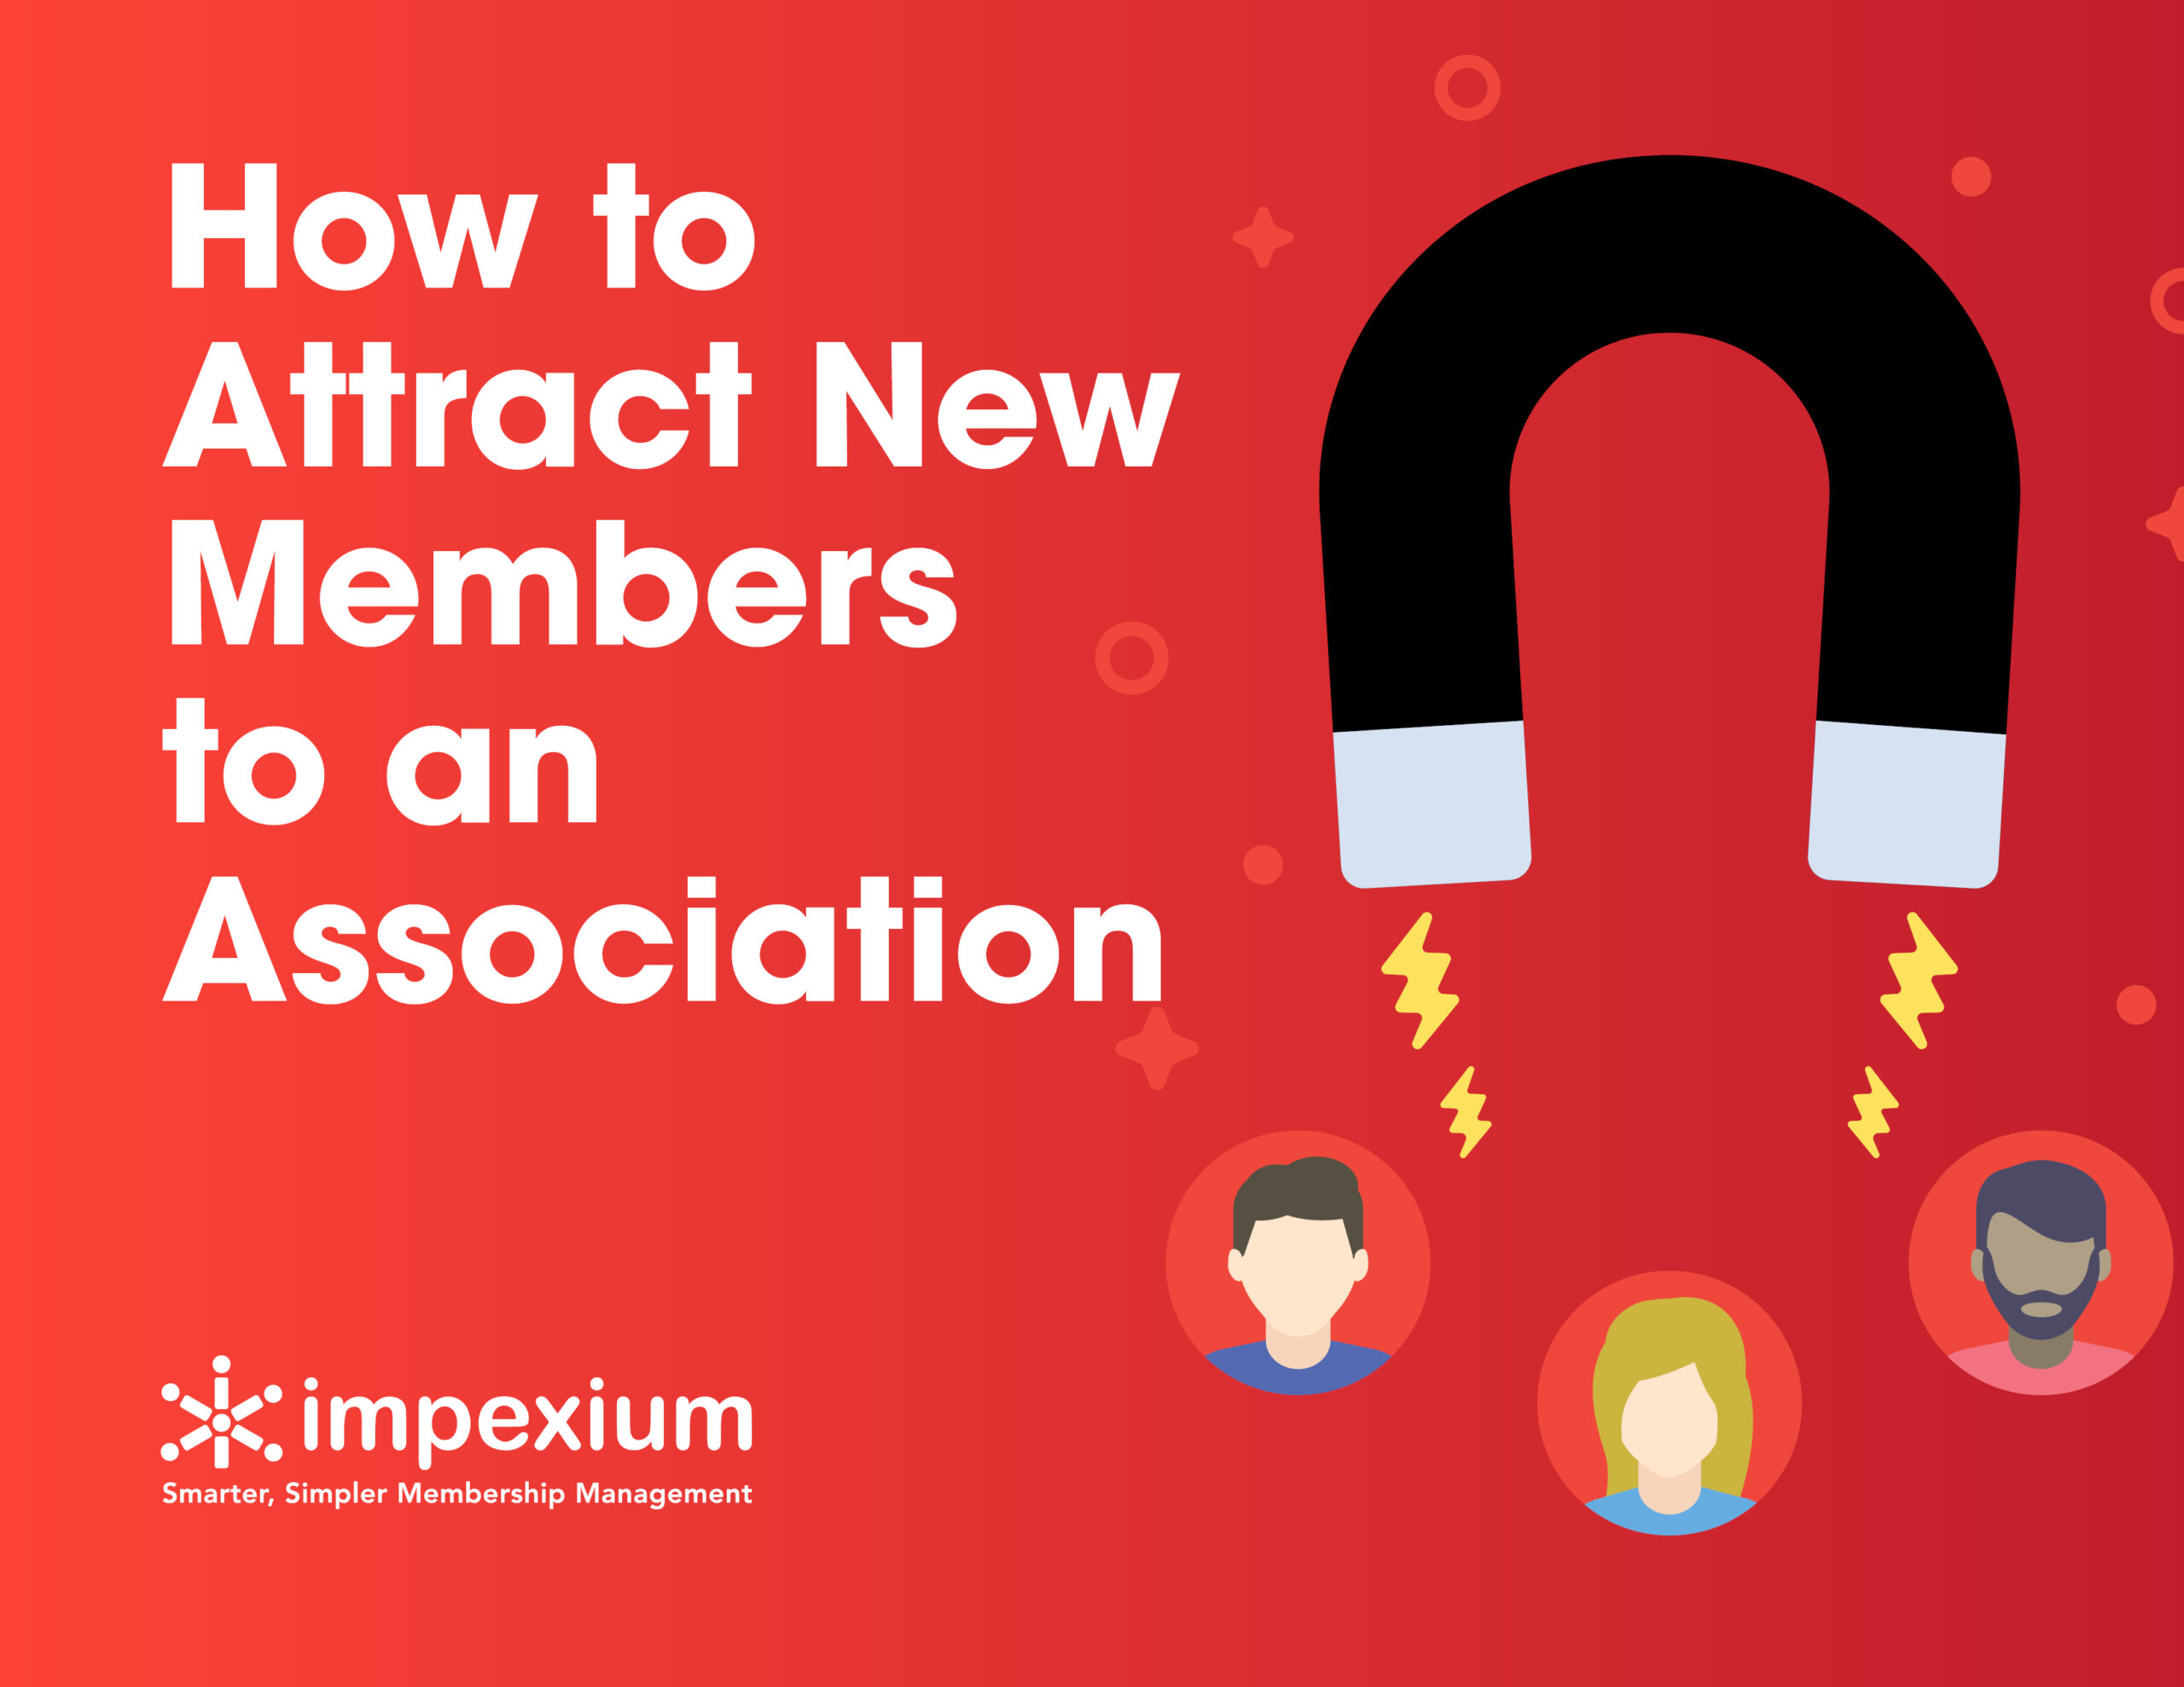 How to Attract New Members: 8 Steps to Take Right Now